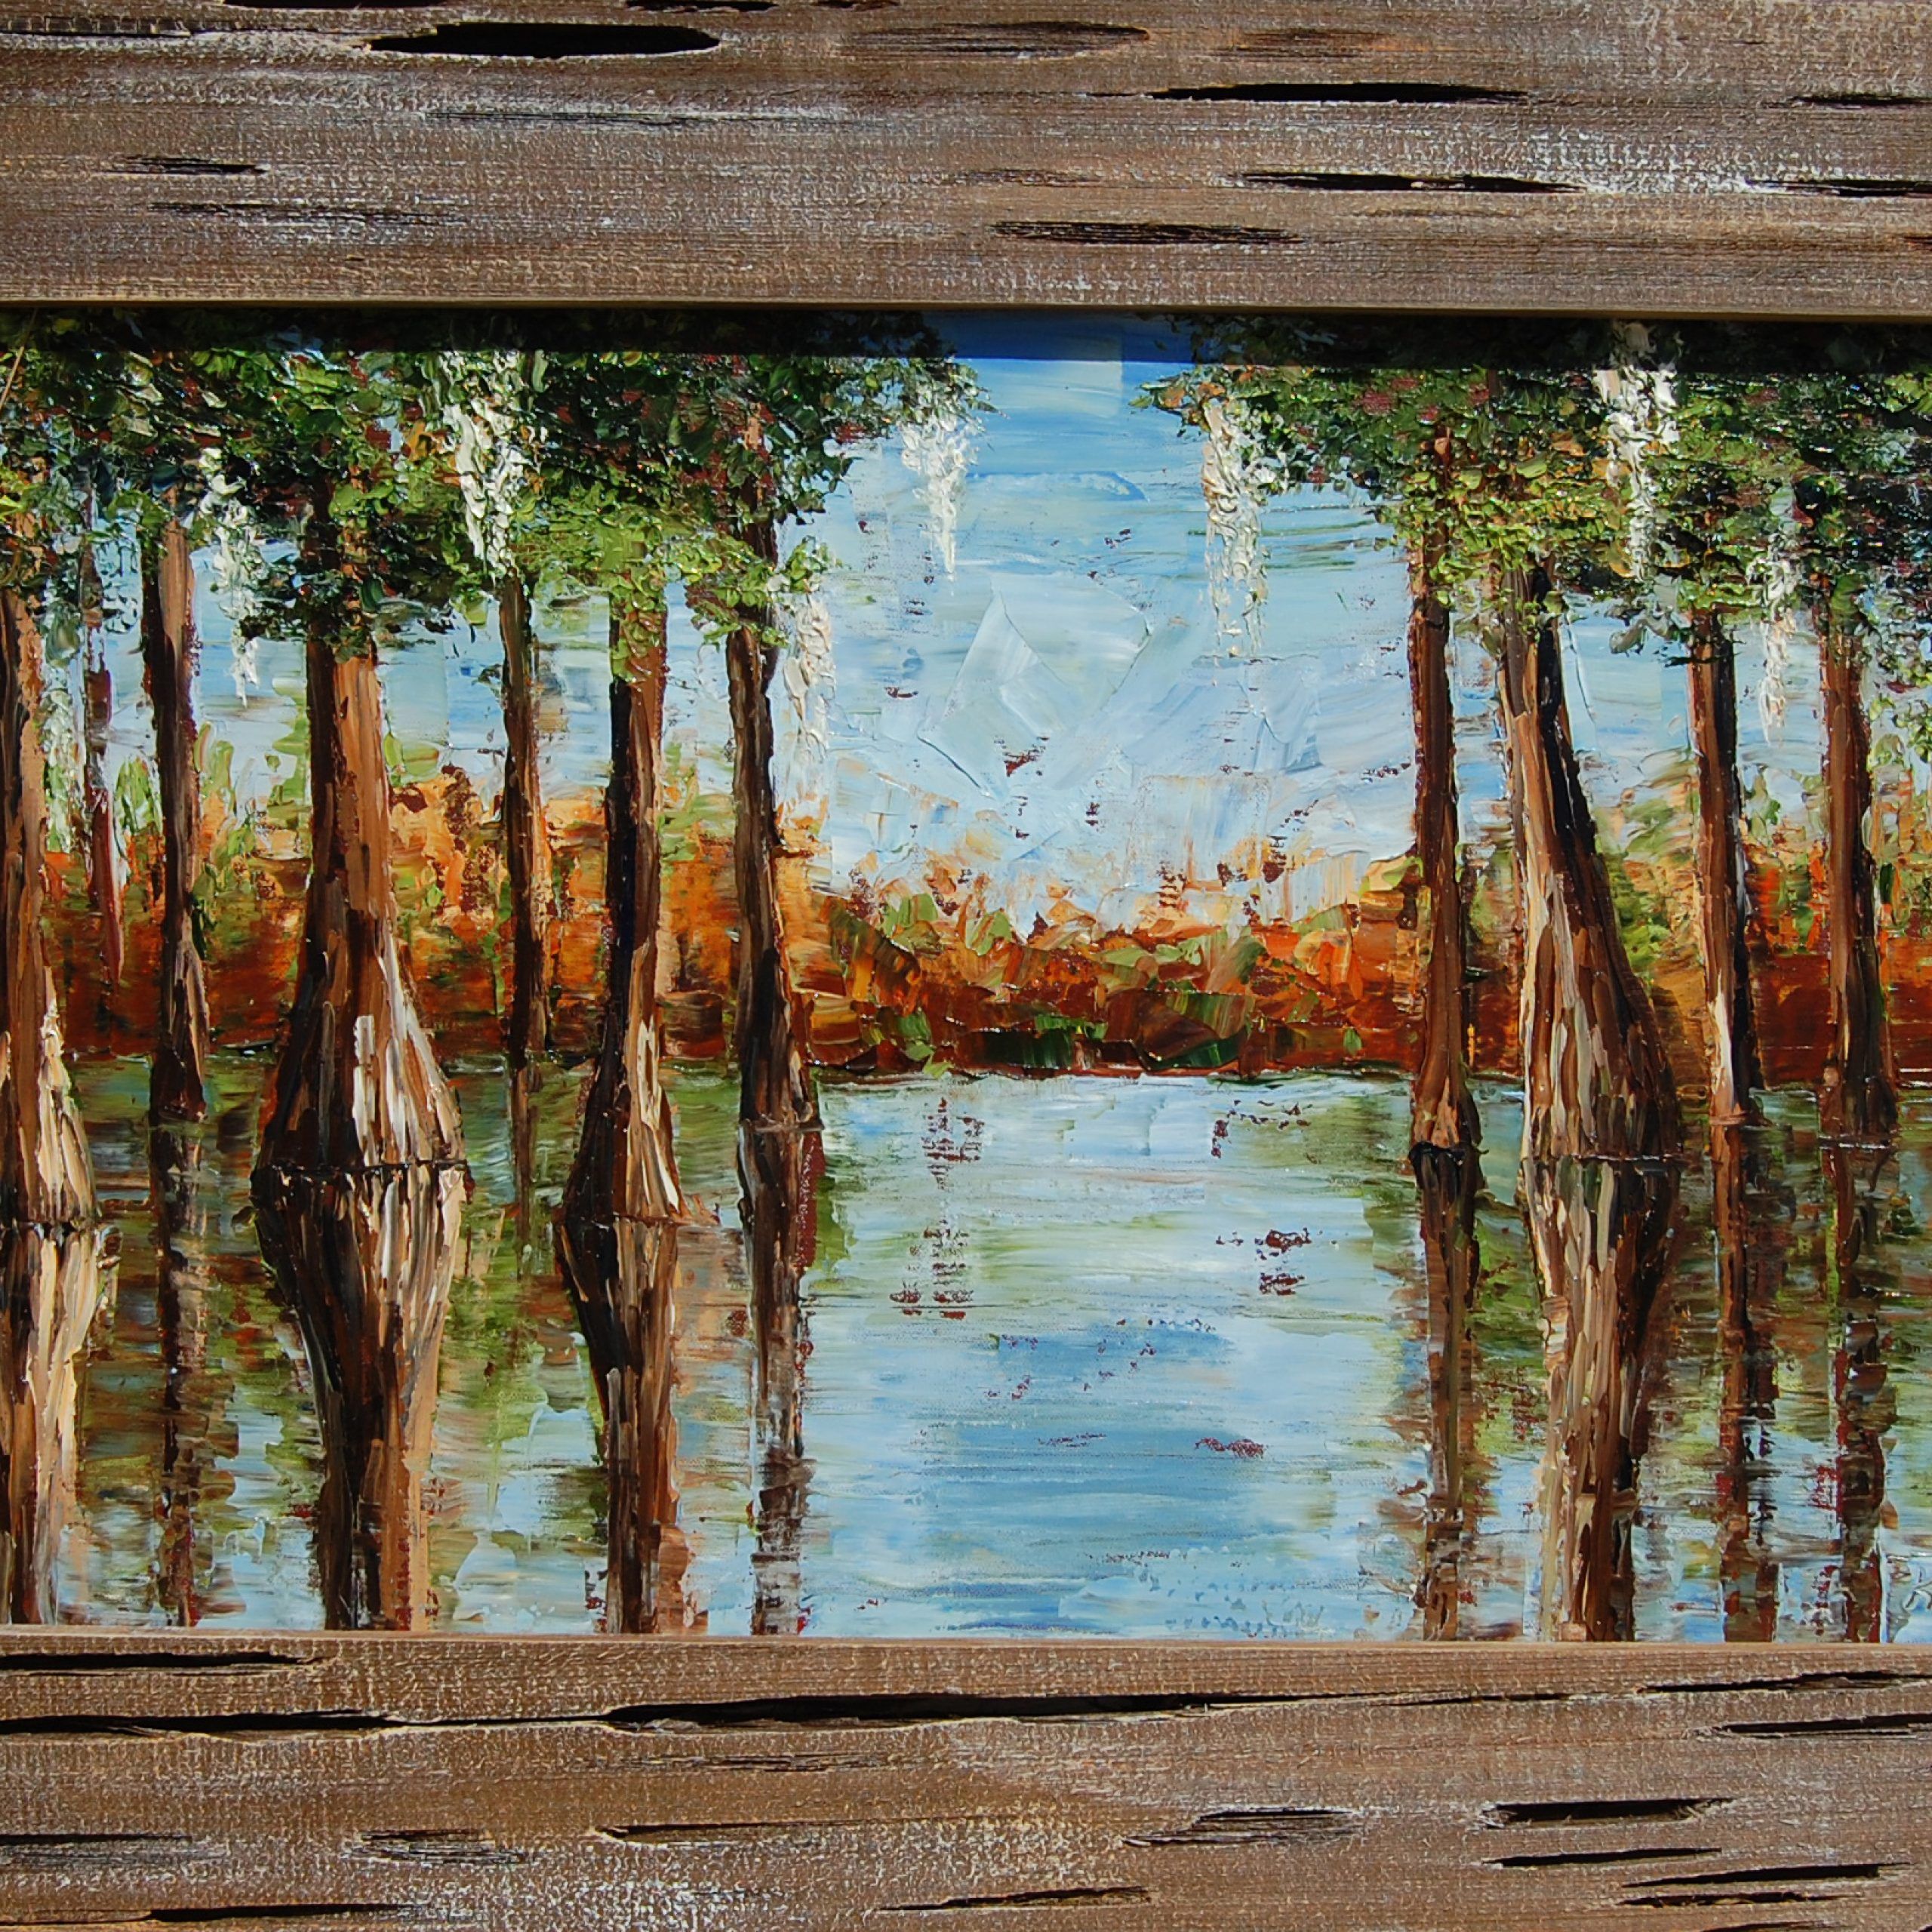 Cypress View 28x44 Framed In Custom Cypress Sold – Kathy Schumacher Art Intended For Recent Cypress Wall Art (View 2 of 20)